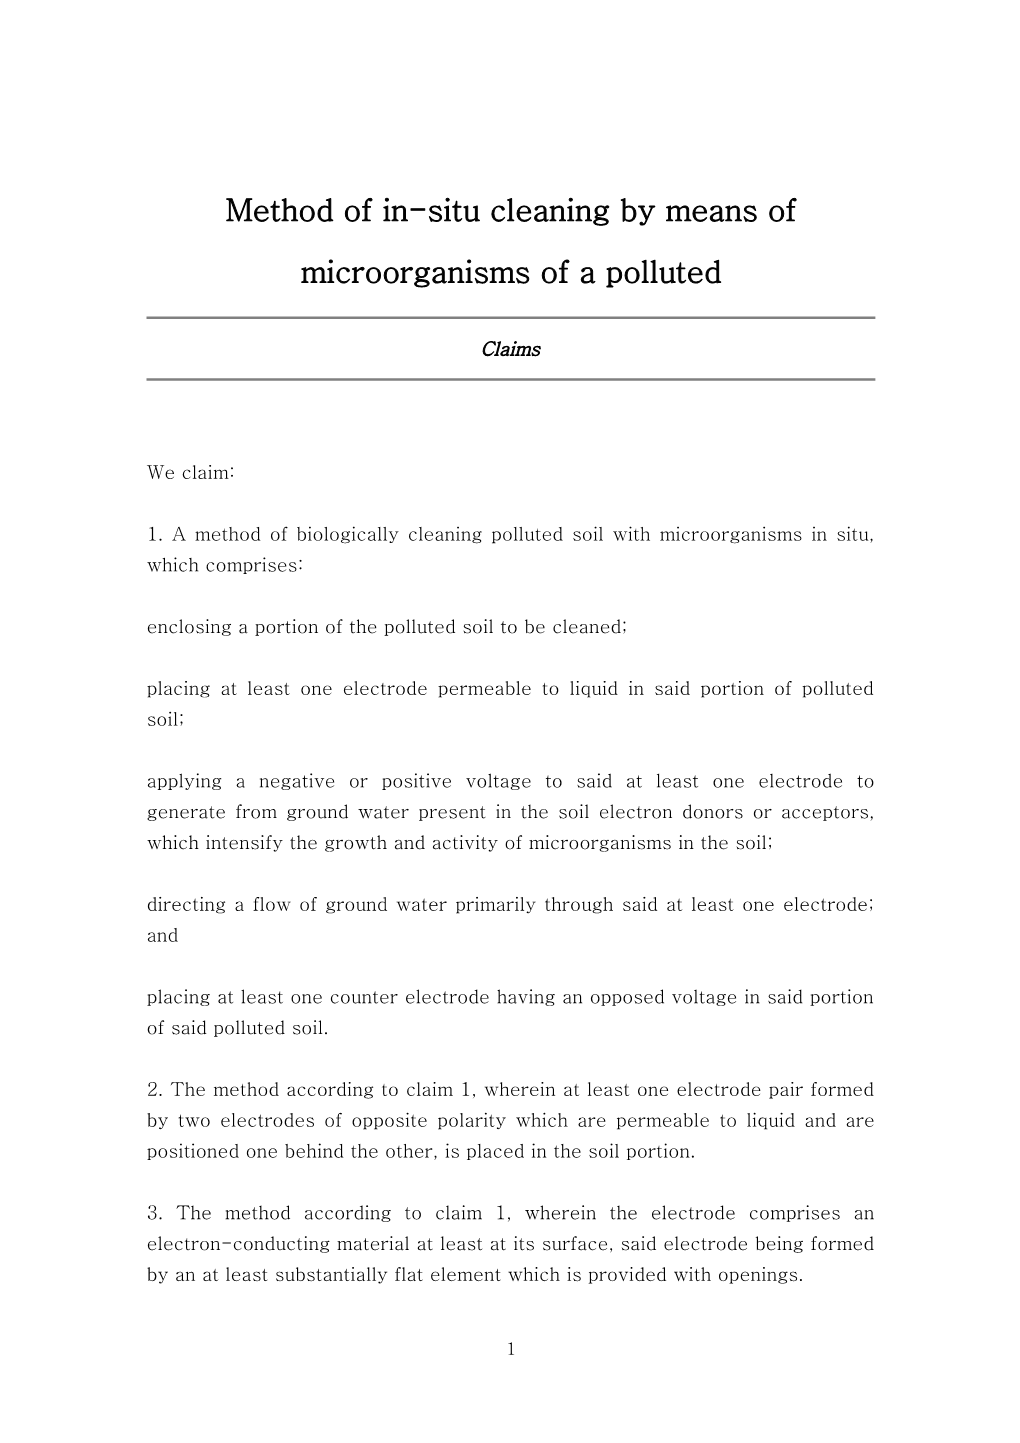 Method of In-Situ Cleaning by Means of Microorganisms of a Polluted